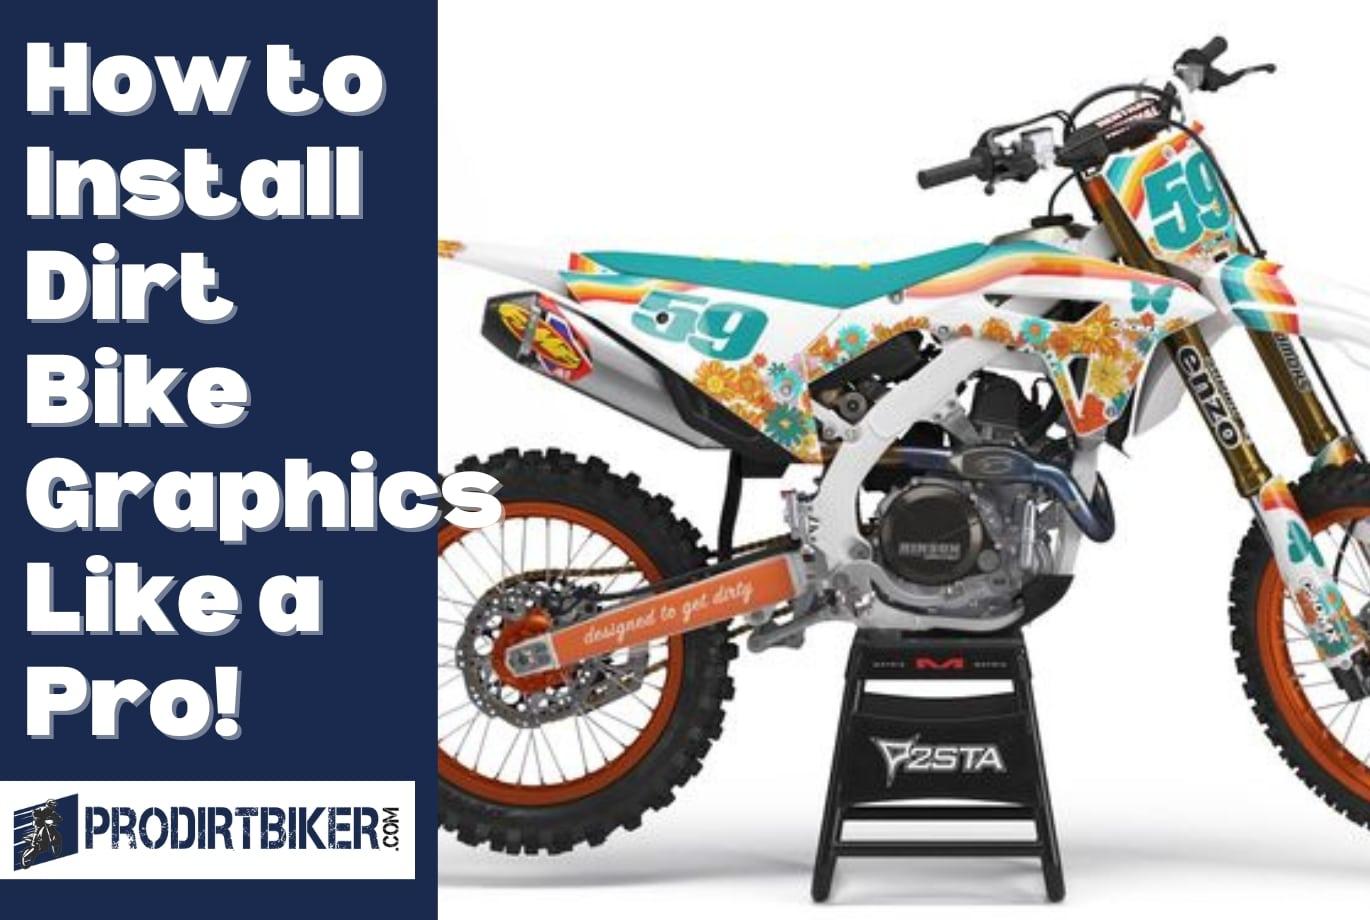 How to Install Dirt Bike Graphics Like a Pro!